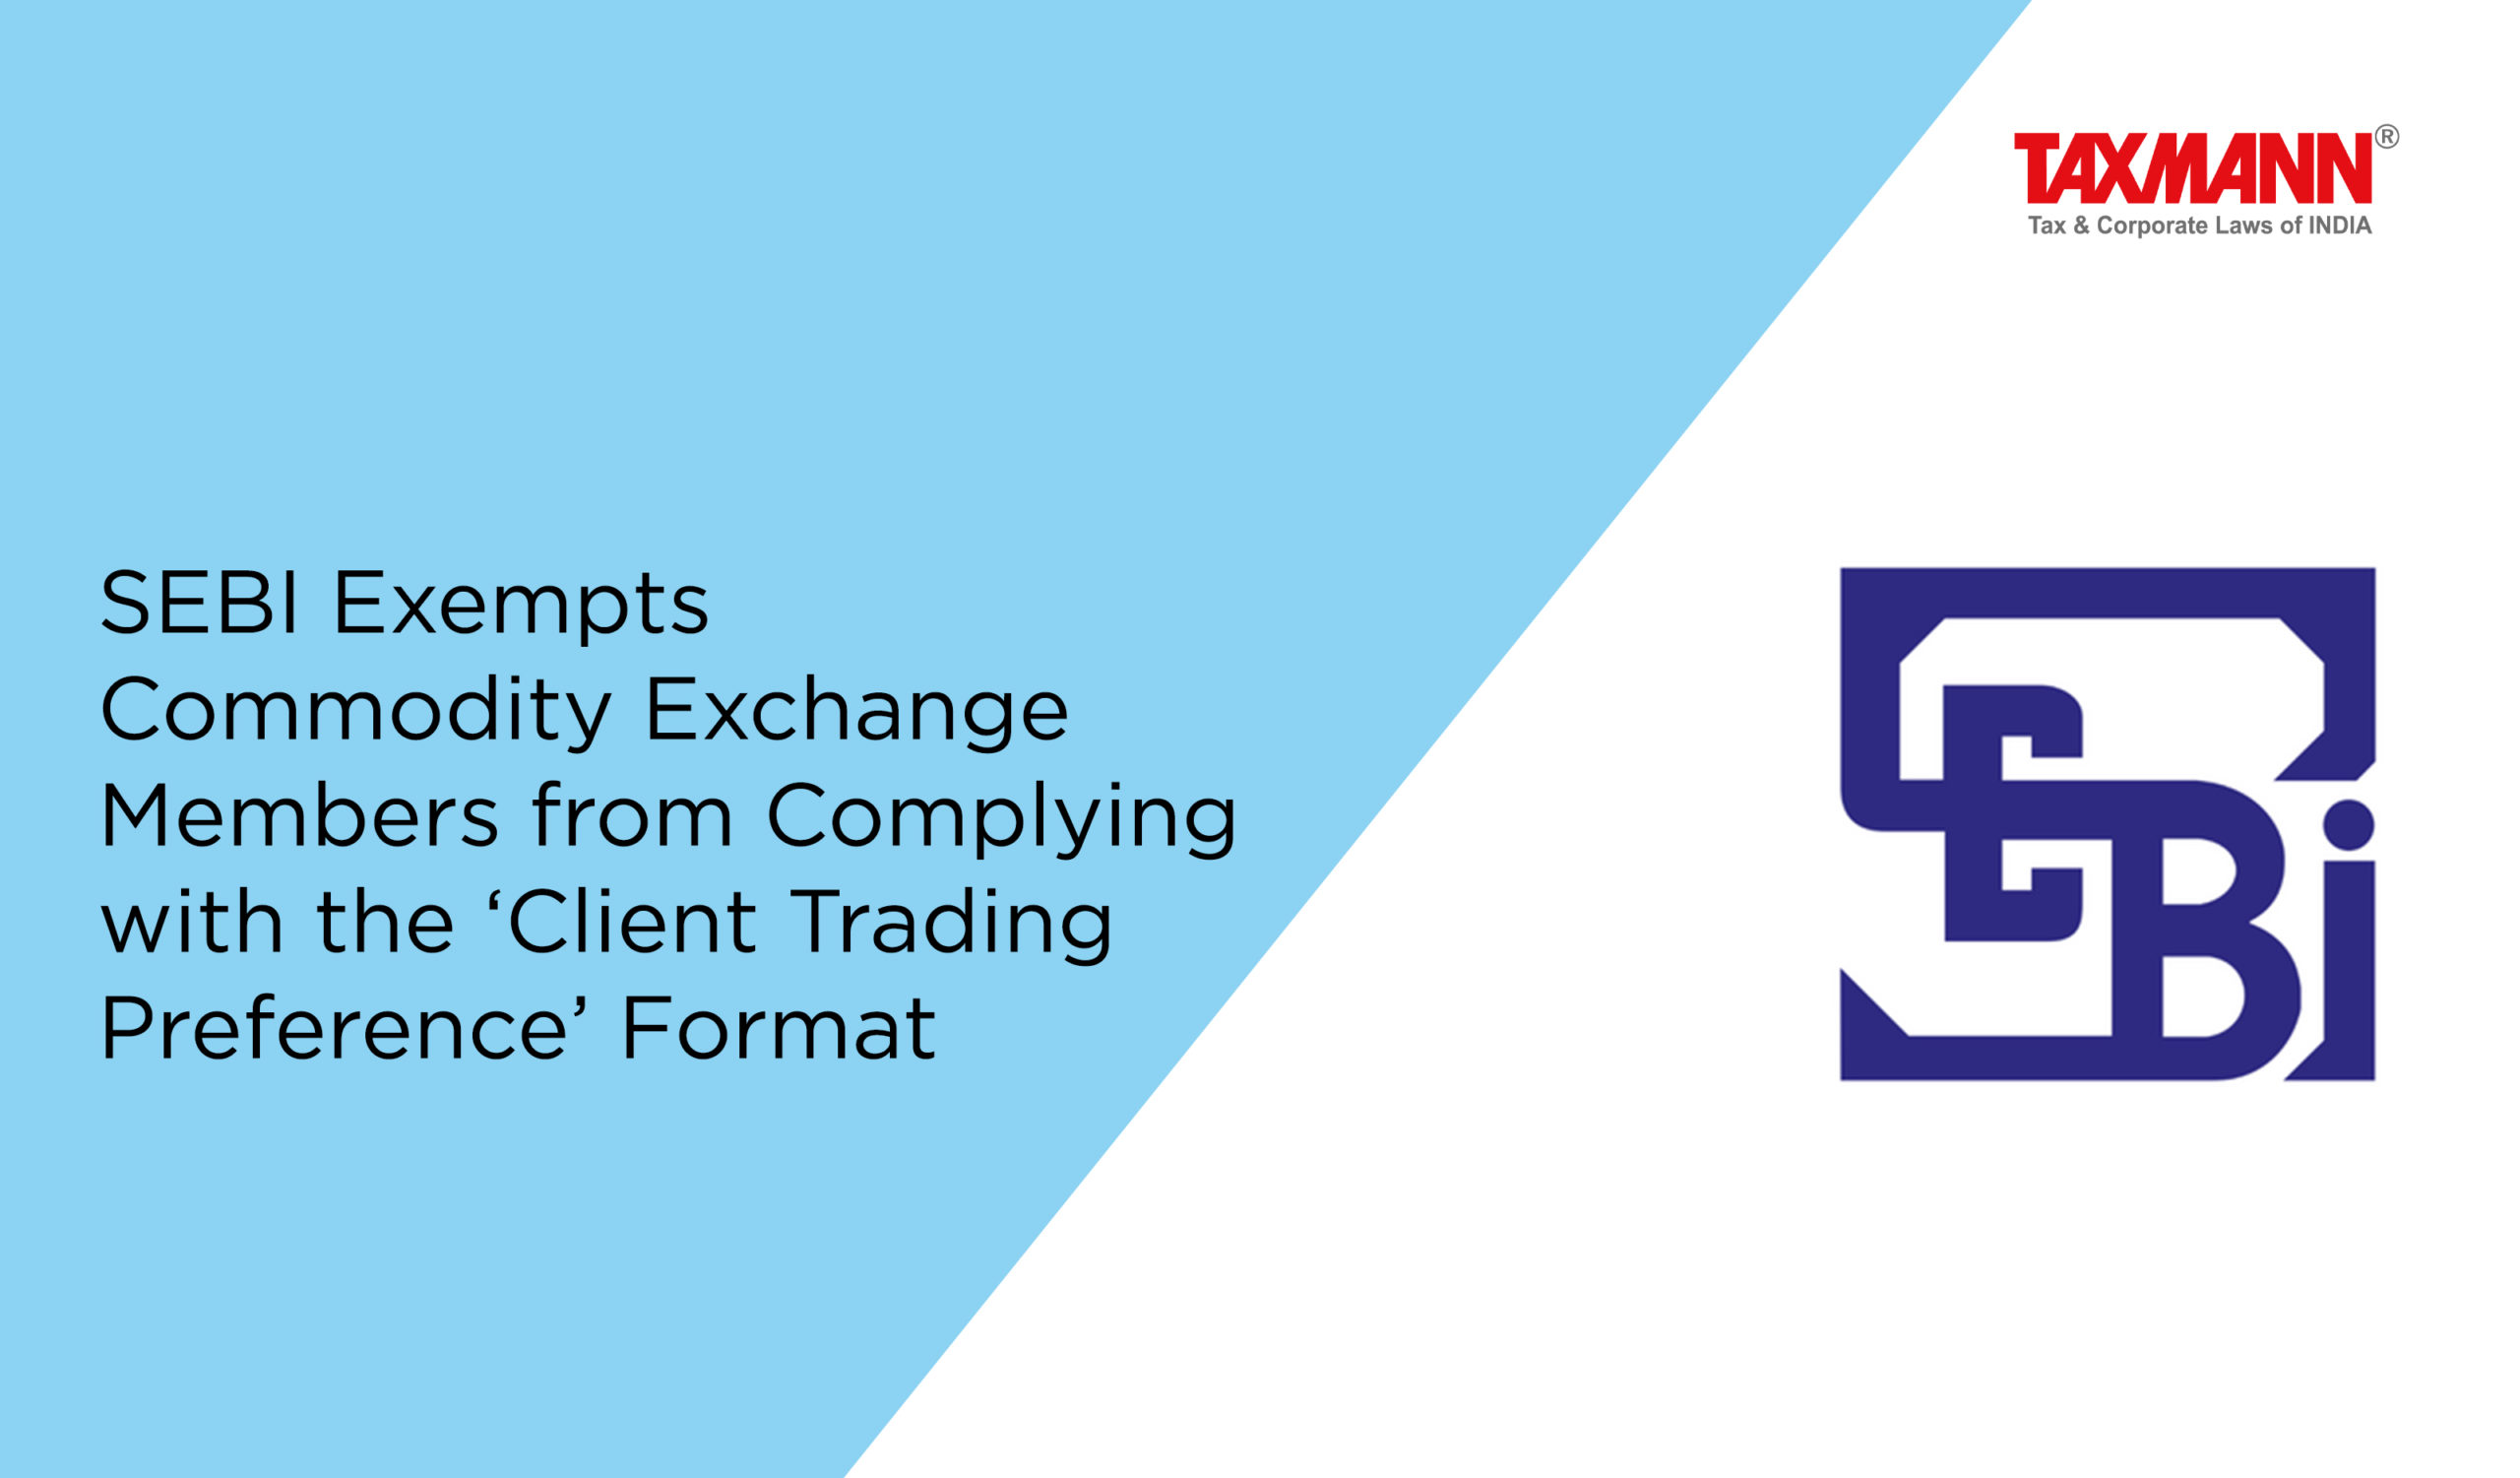 SEBI's format of Client Trading Preference